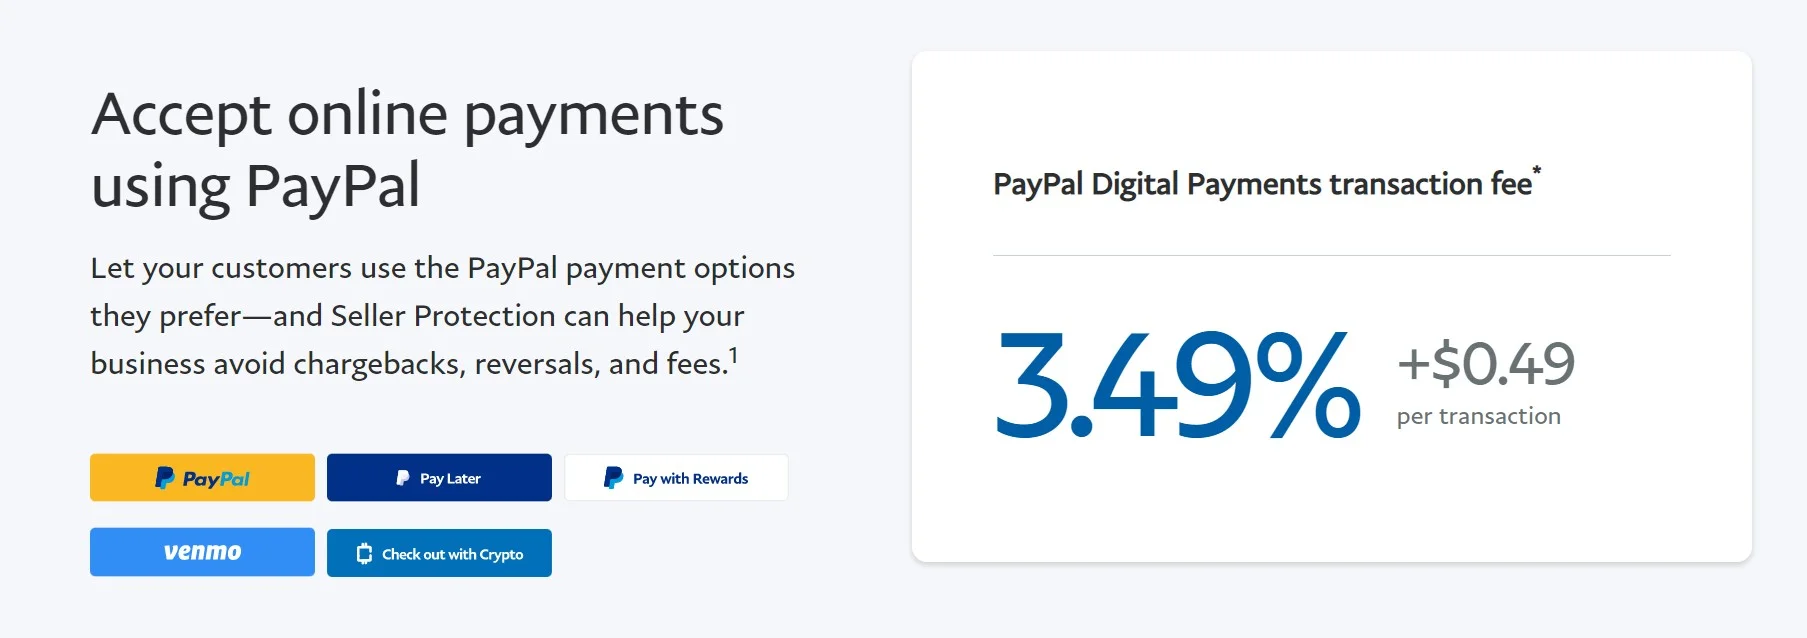 PlayStation Store Now Accepting PayPal As a Payment Option - Prima